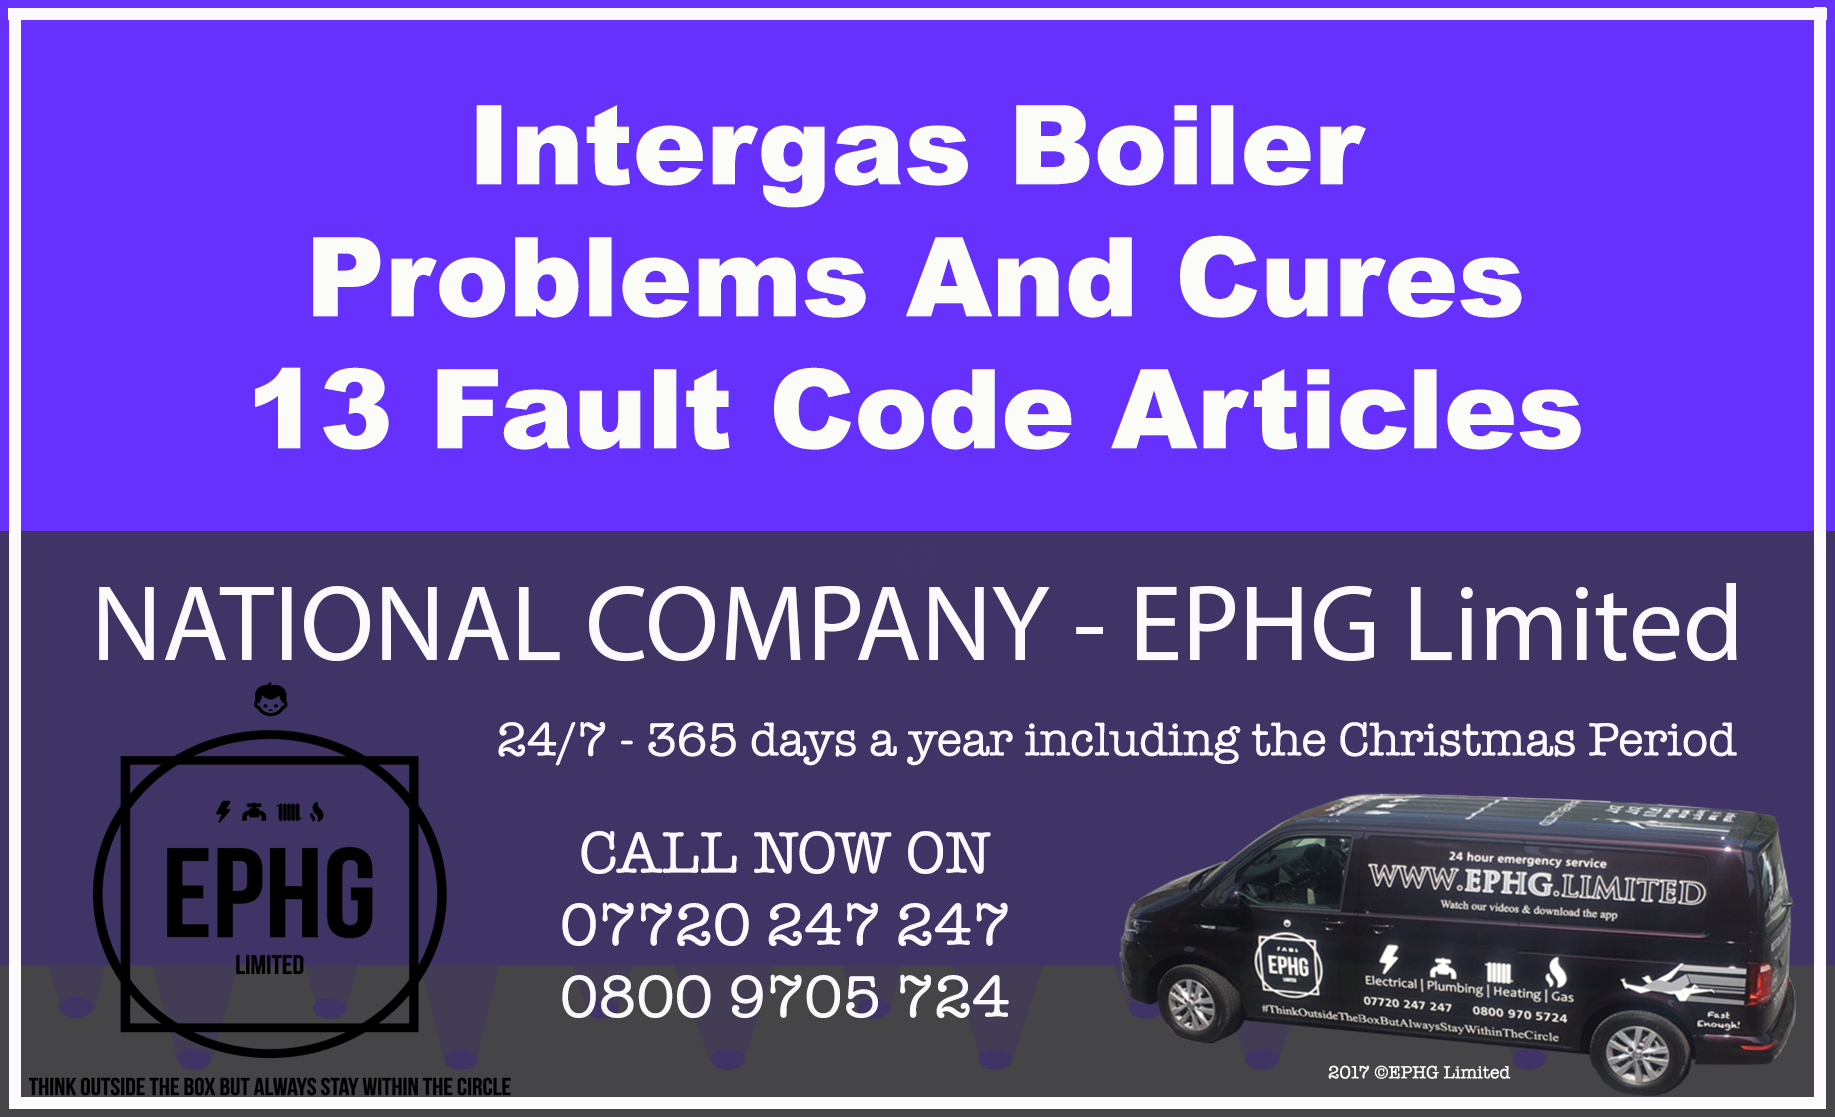 Intergas Boiler Problems And Cures